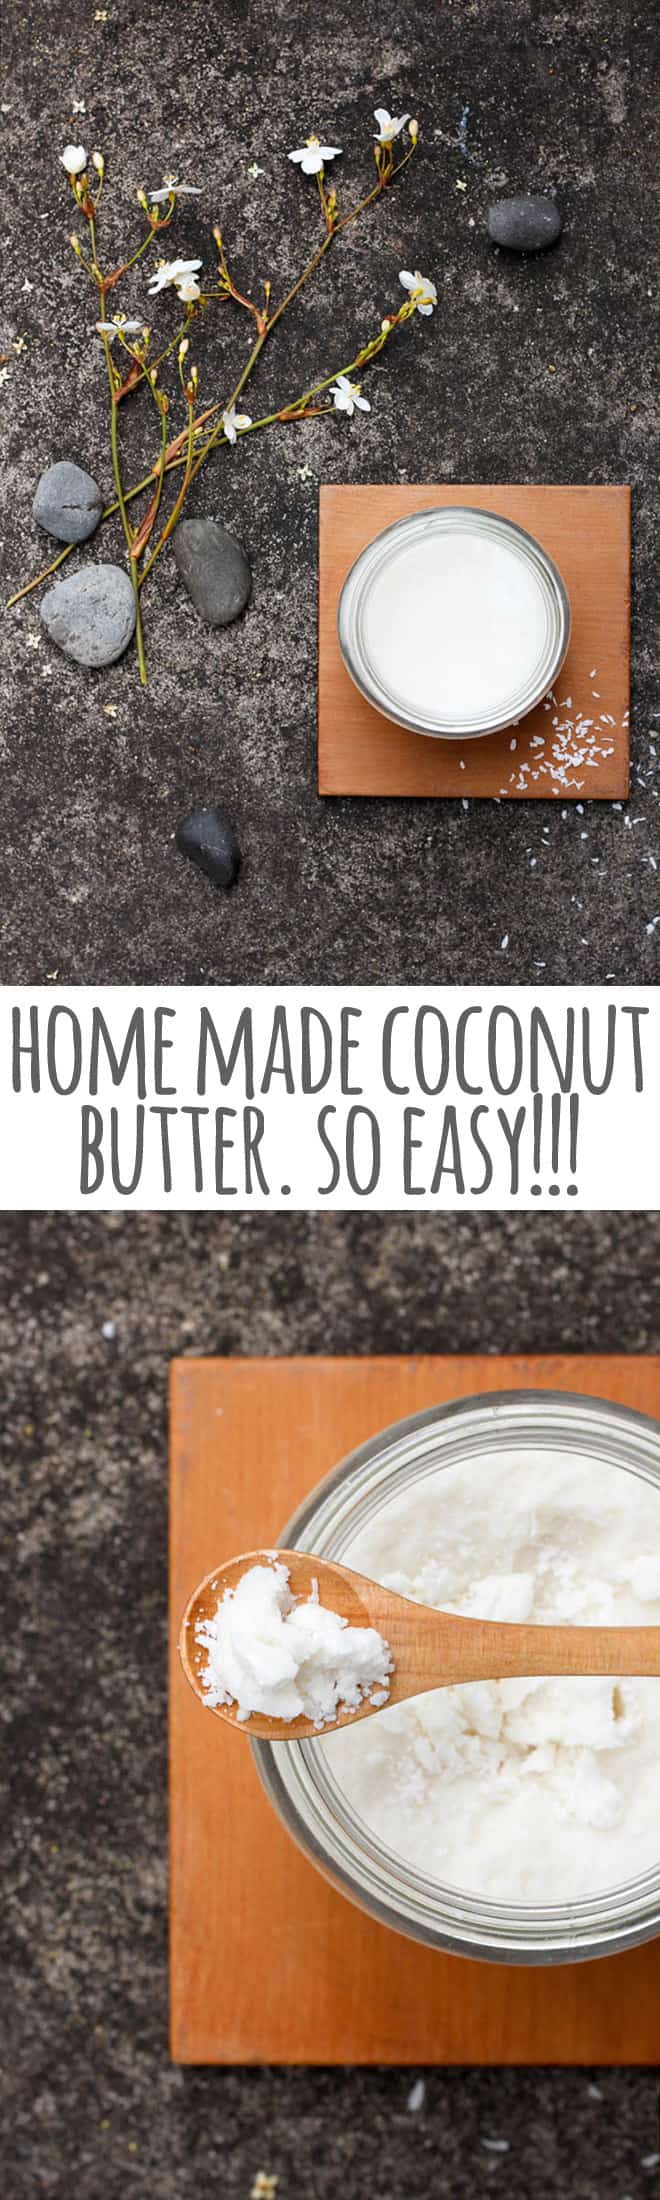 Making your own coconut butter has to be one of the simplest and most rewarding things you can do in the kitchen.